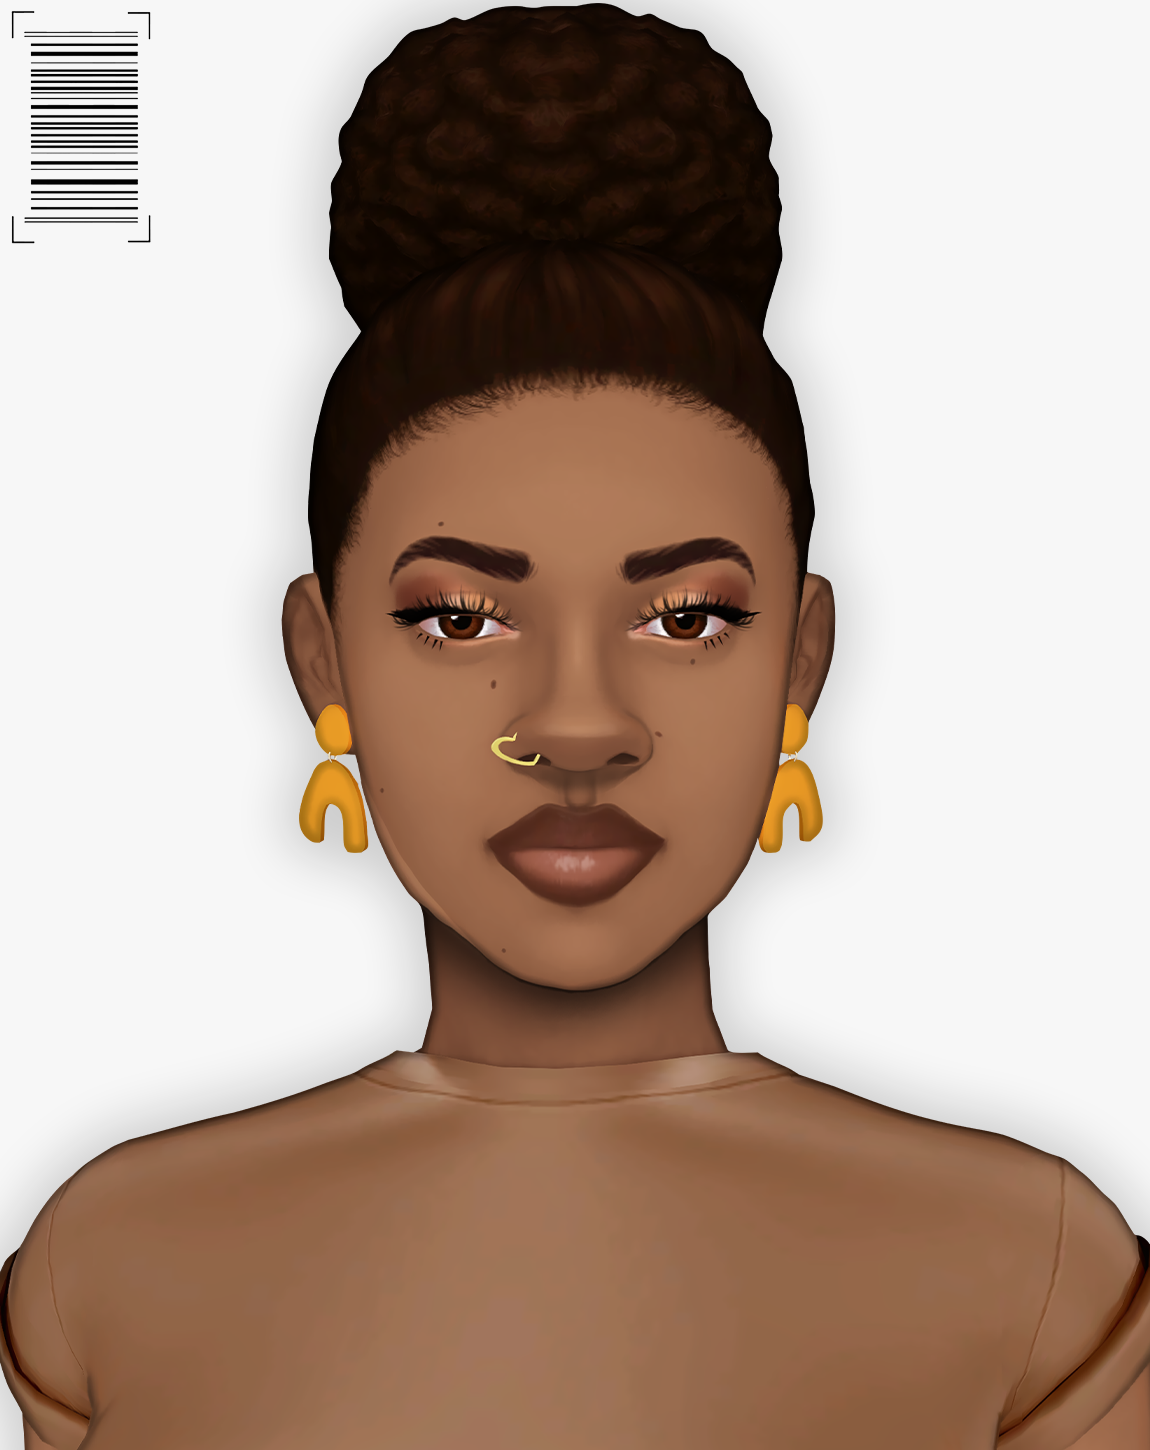 ceeproductions:
“High Bun HairA simple casual bun
• 24 EA Swatches plus a dark brown (25 Total all tagged)
• Not hat compatible
• T-E
• 5.1K Poly
DOWNLOAD: SFS | DropboxCredit to: @simandy Actions, @aharris00britney Graidents, @qwertysims​ Actions
”